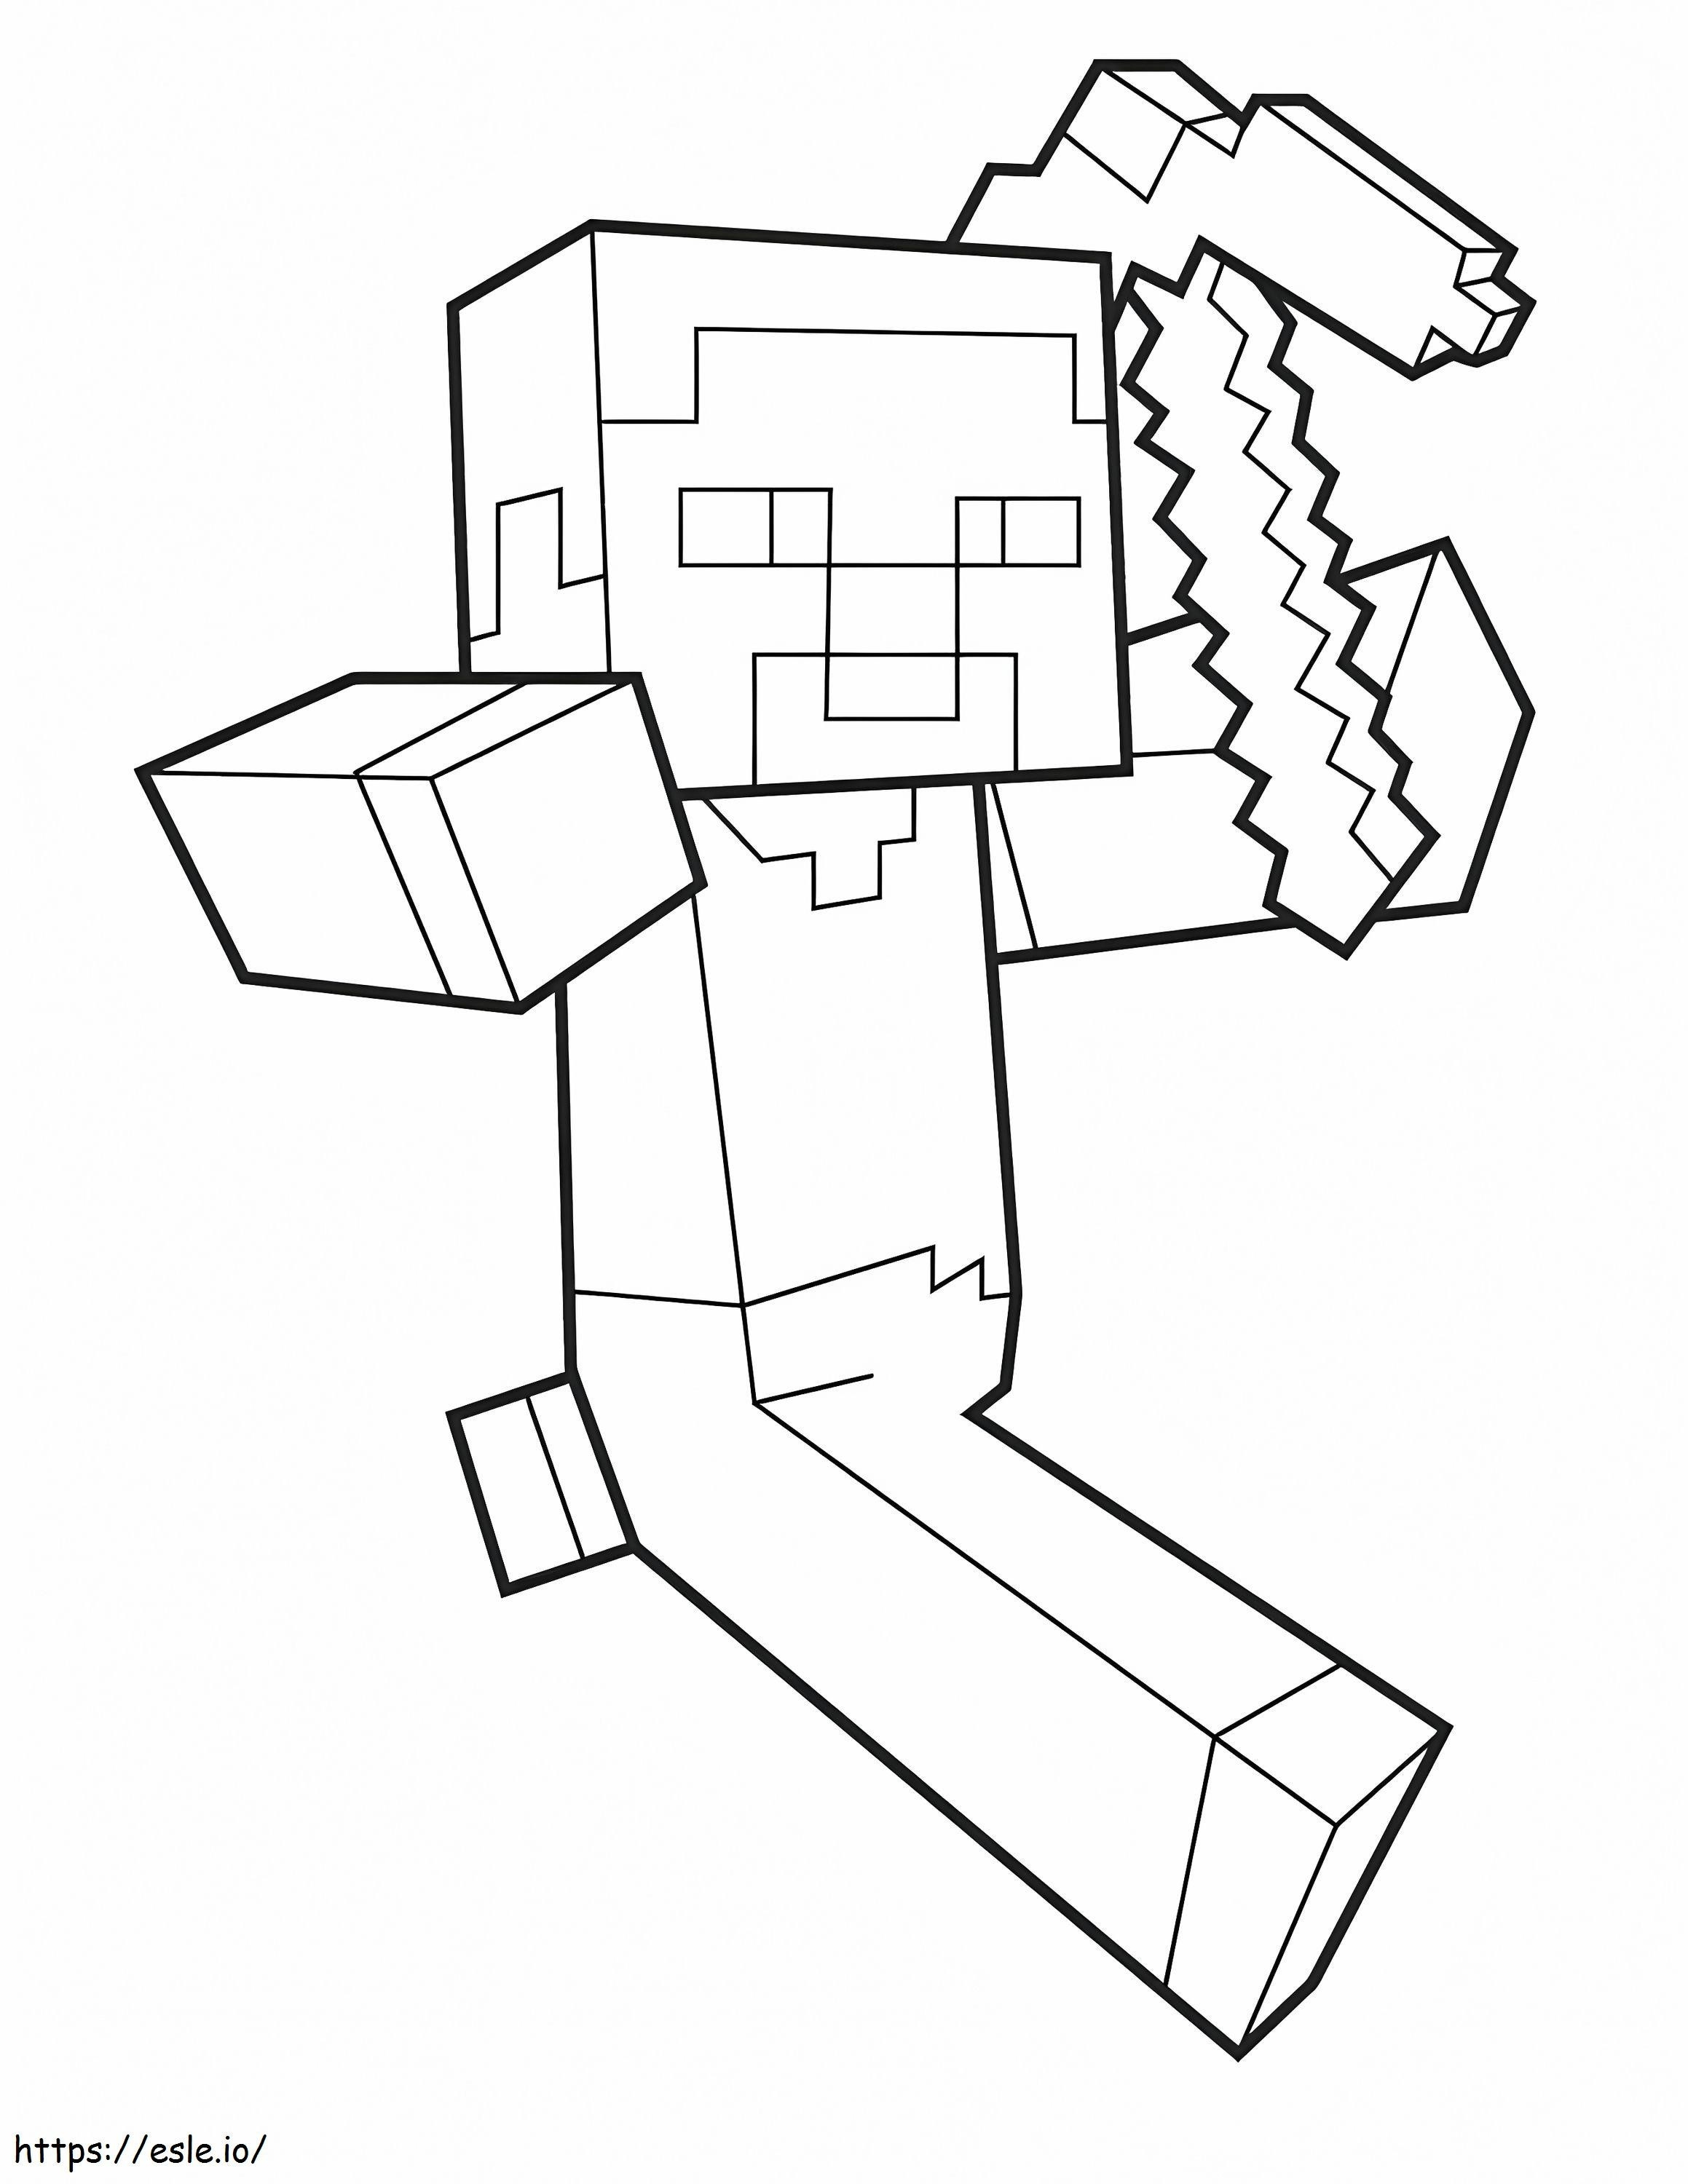 Steve Running Holding Pickaxe coloring page